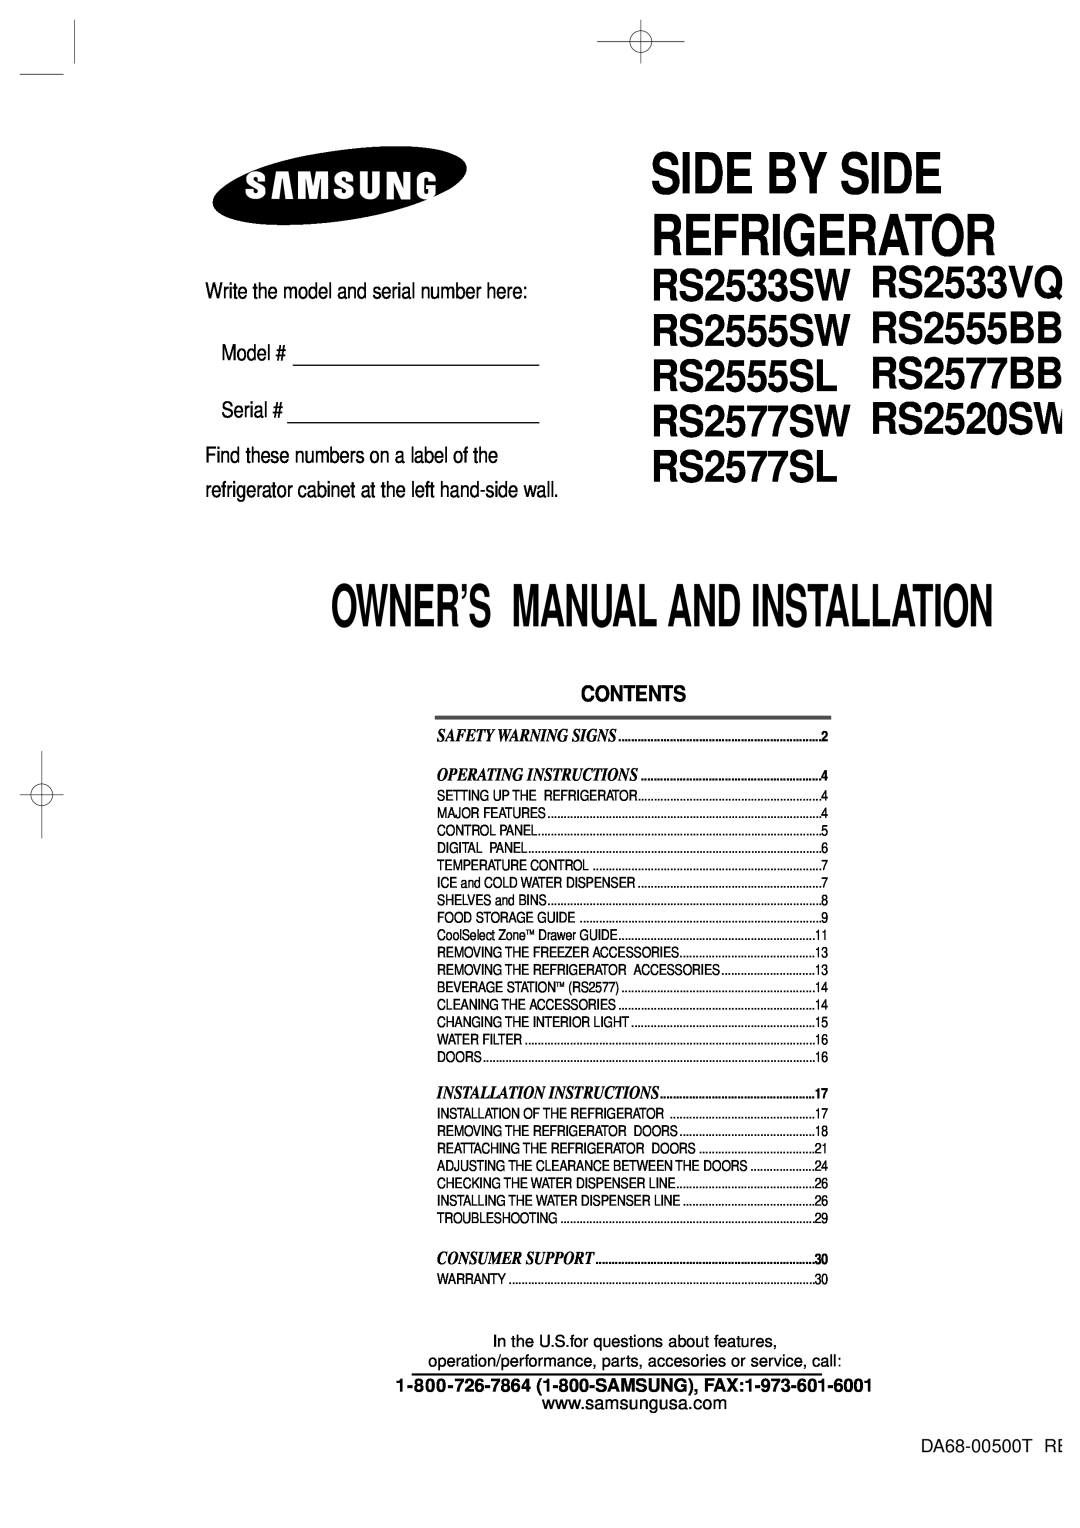 Samsung RS2577SW owner manual Write the model and serial number here Model # Serial #, Contents, Side By Side Refrigerator 